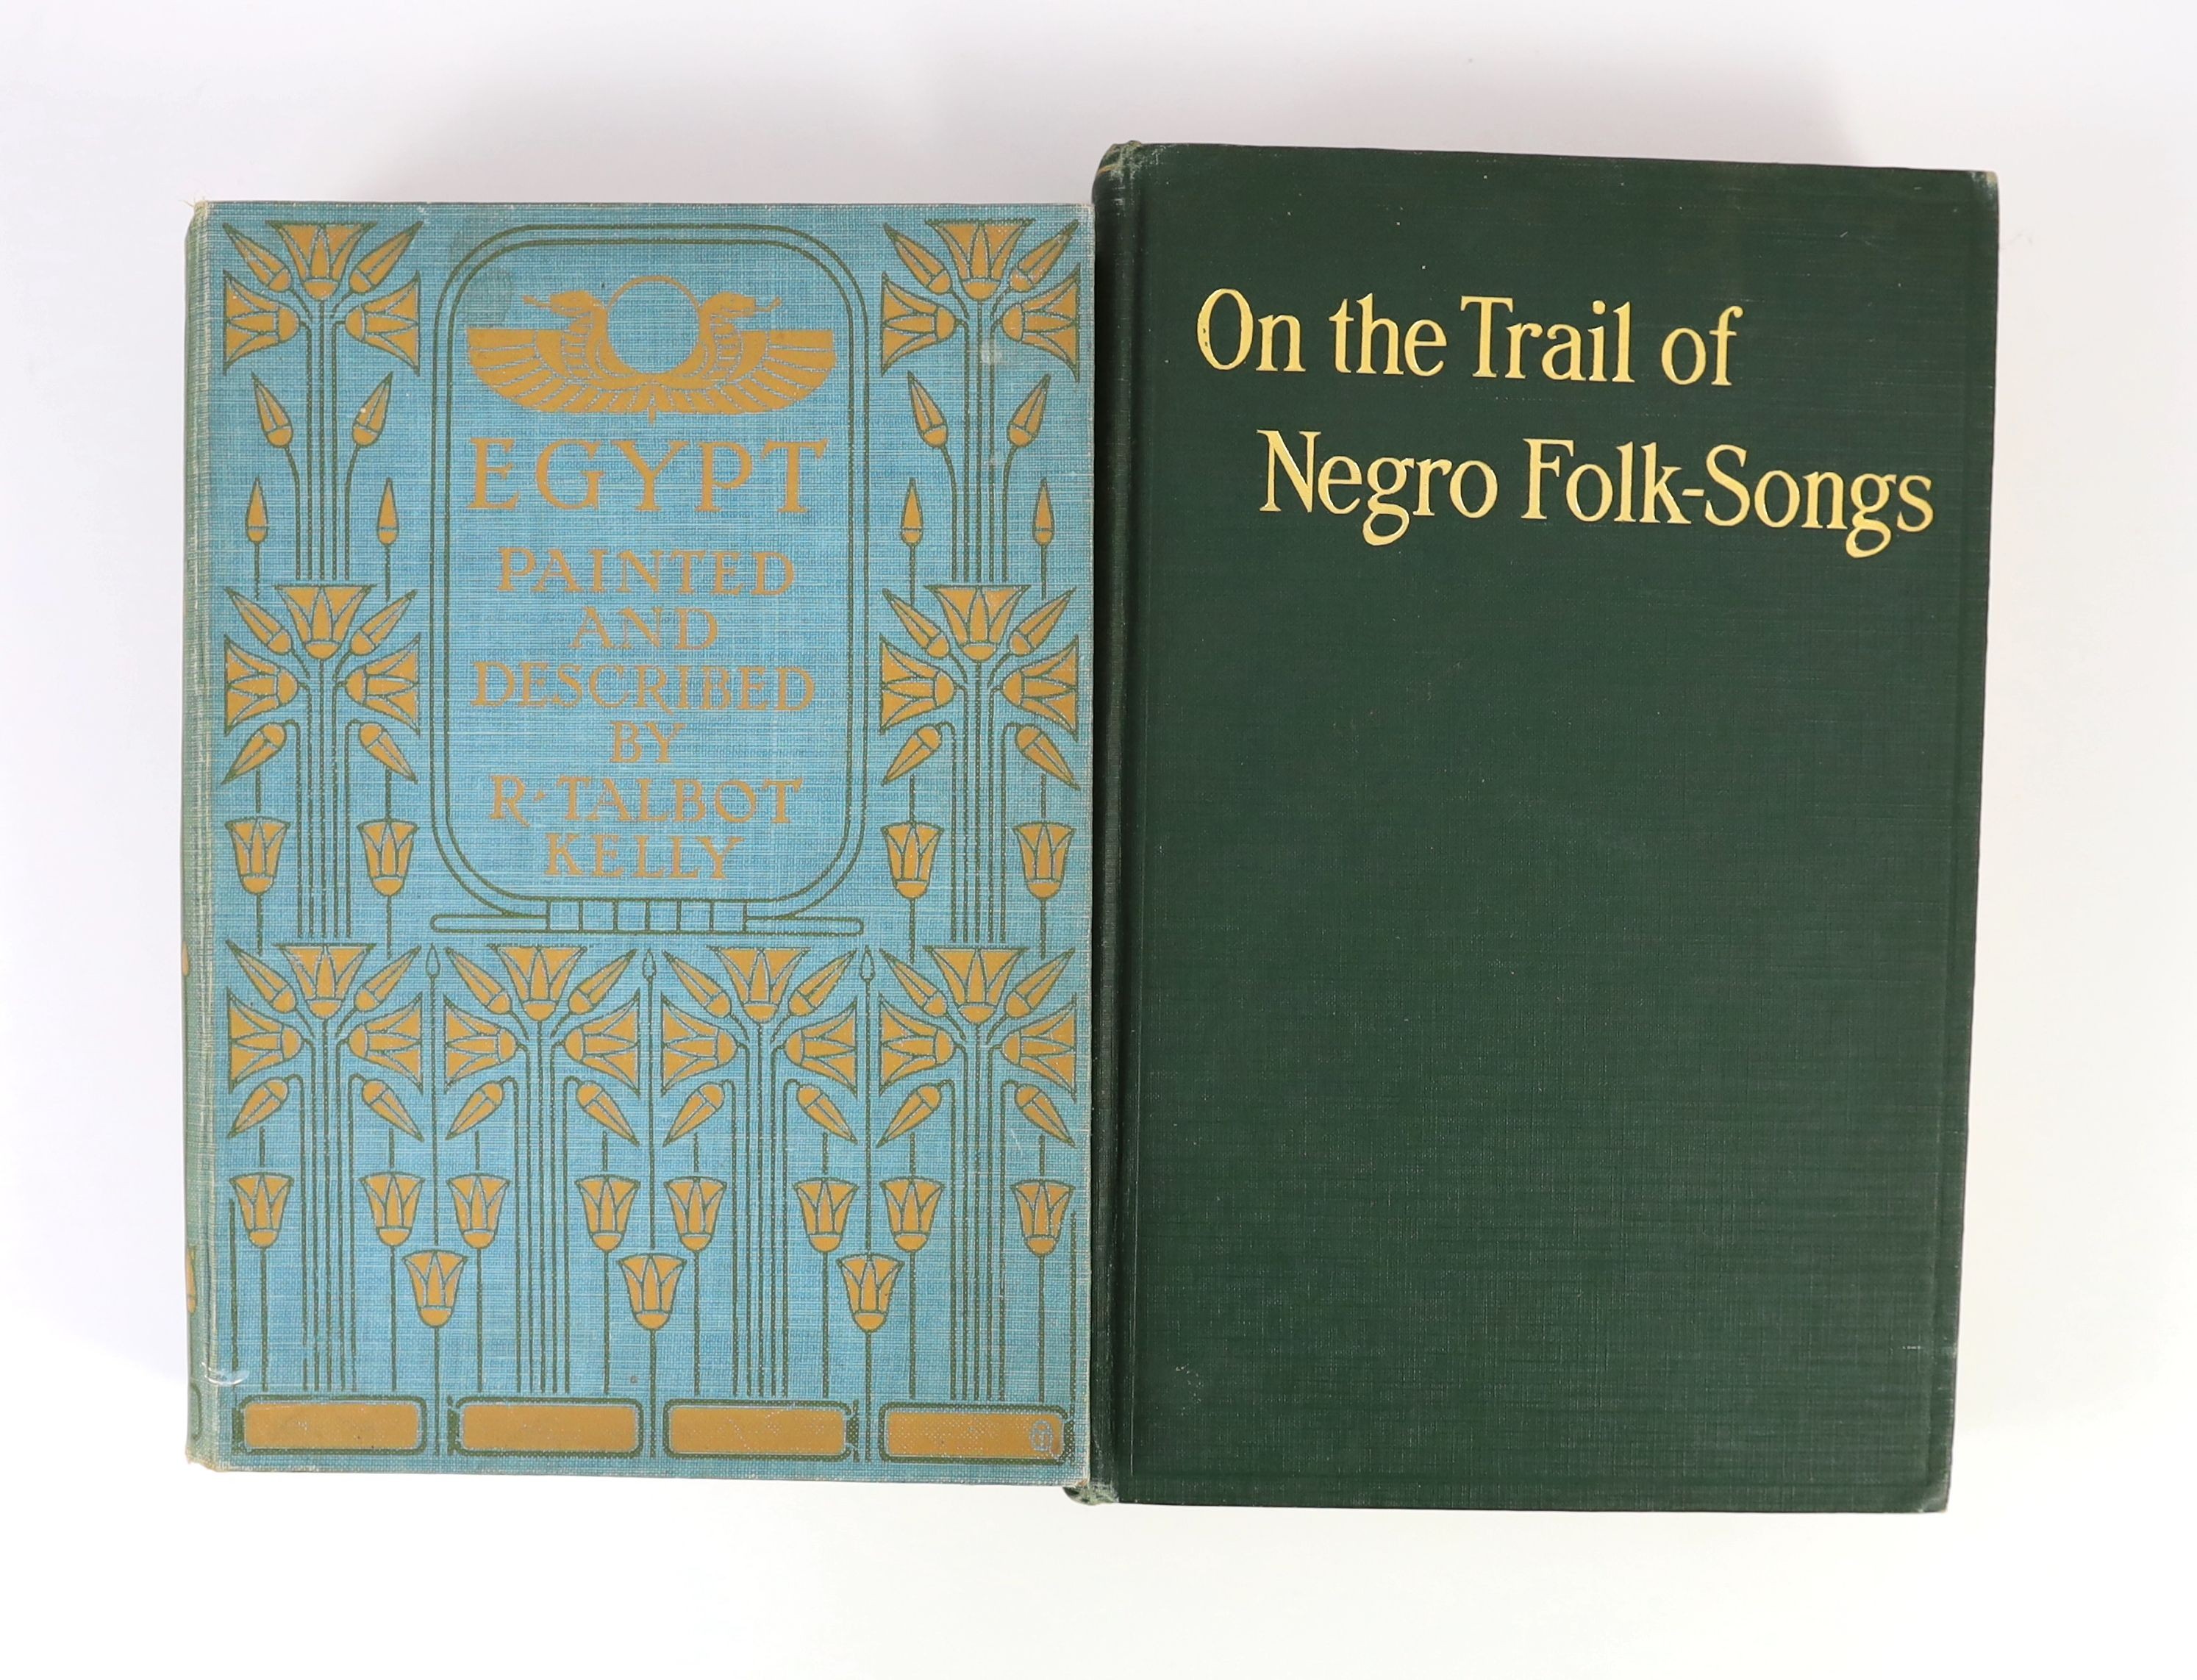 Scarborough, Dorothy - On The Trail of Negro Folk-Songs. 2nd printing. Publisher buckram with gilt letters direct on upper and spine. Gilt top. 8vo. Harvard University Press, Cambridge, 1925., Kelly, R. Talbot - Egypt Pa